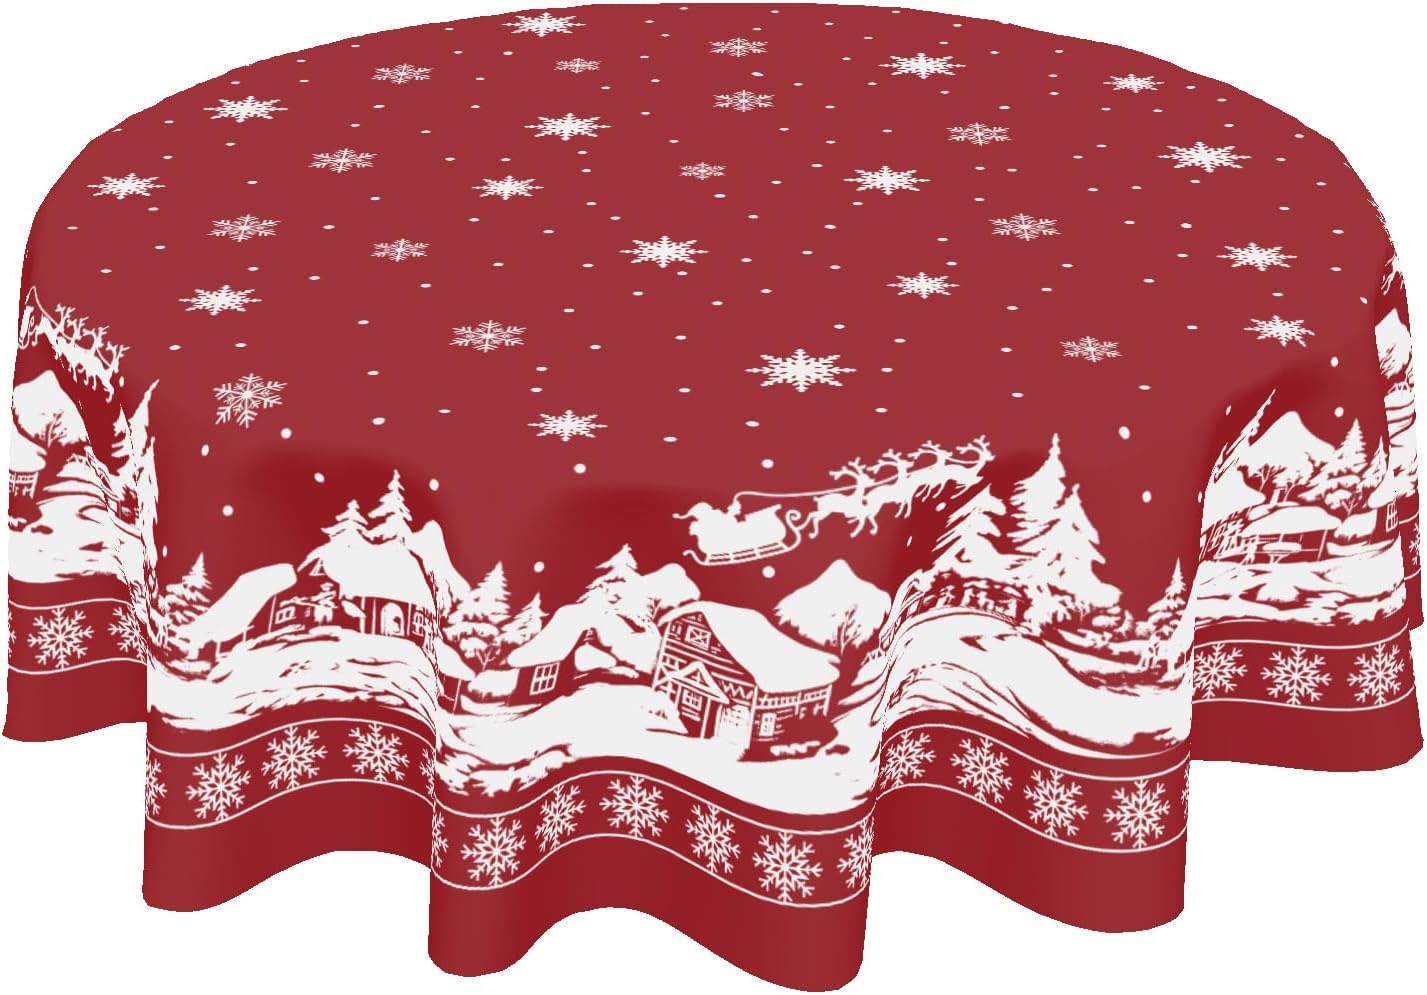 ABSOP Red Christmas Tablecloth Round 60 Inch Deer Snowflake Winter Table Cloth Washable Farmhouse Merry Christmas Table Cover for Kitchen Dinner Room Holiday Party Indoor Outdoor Home Decor